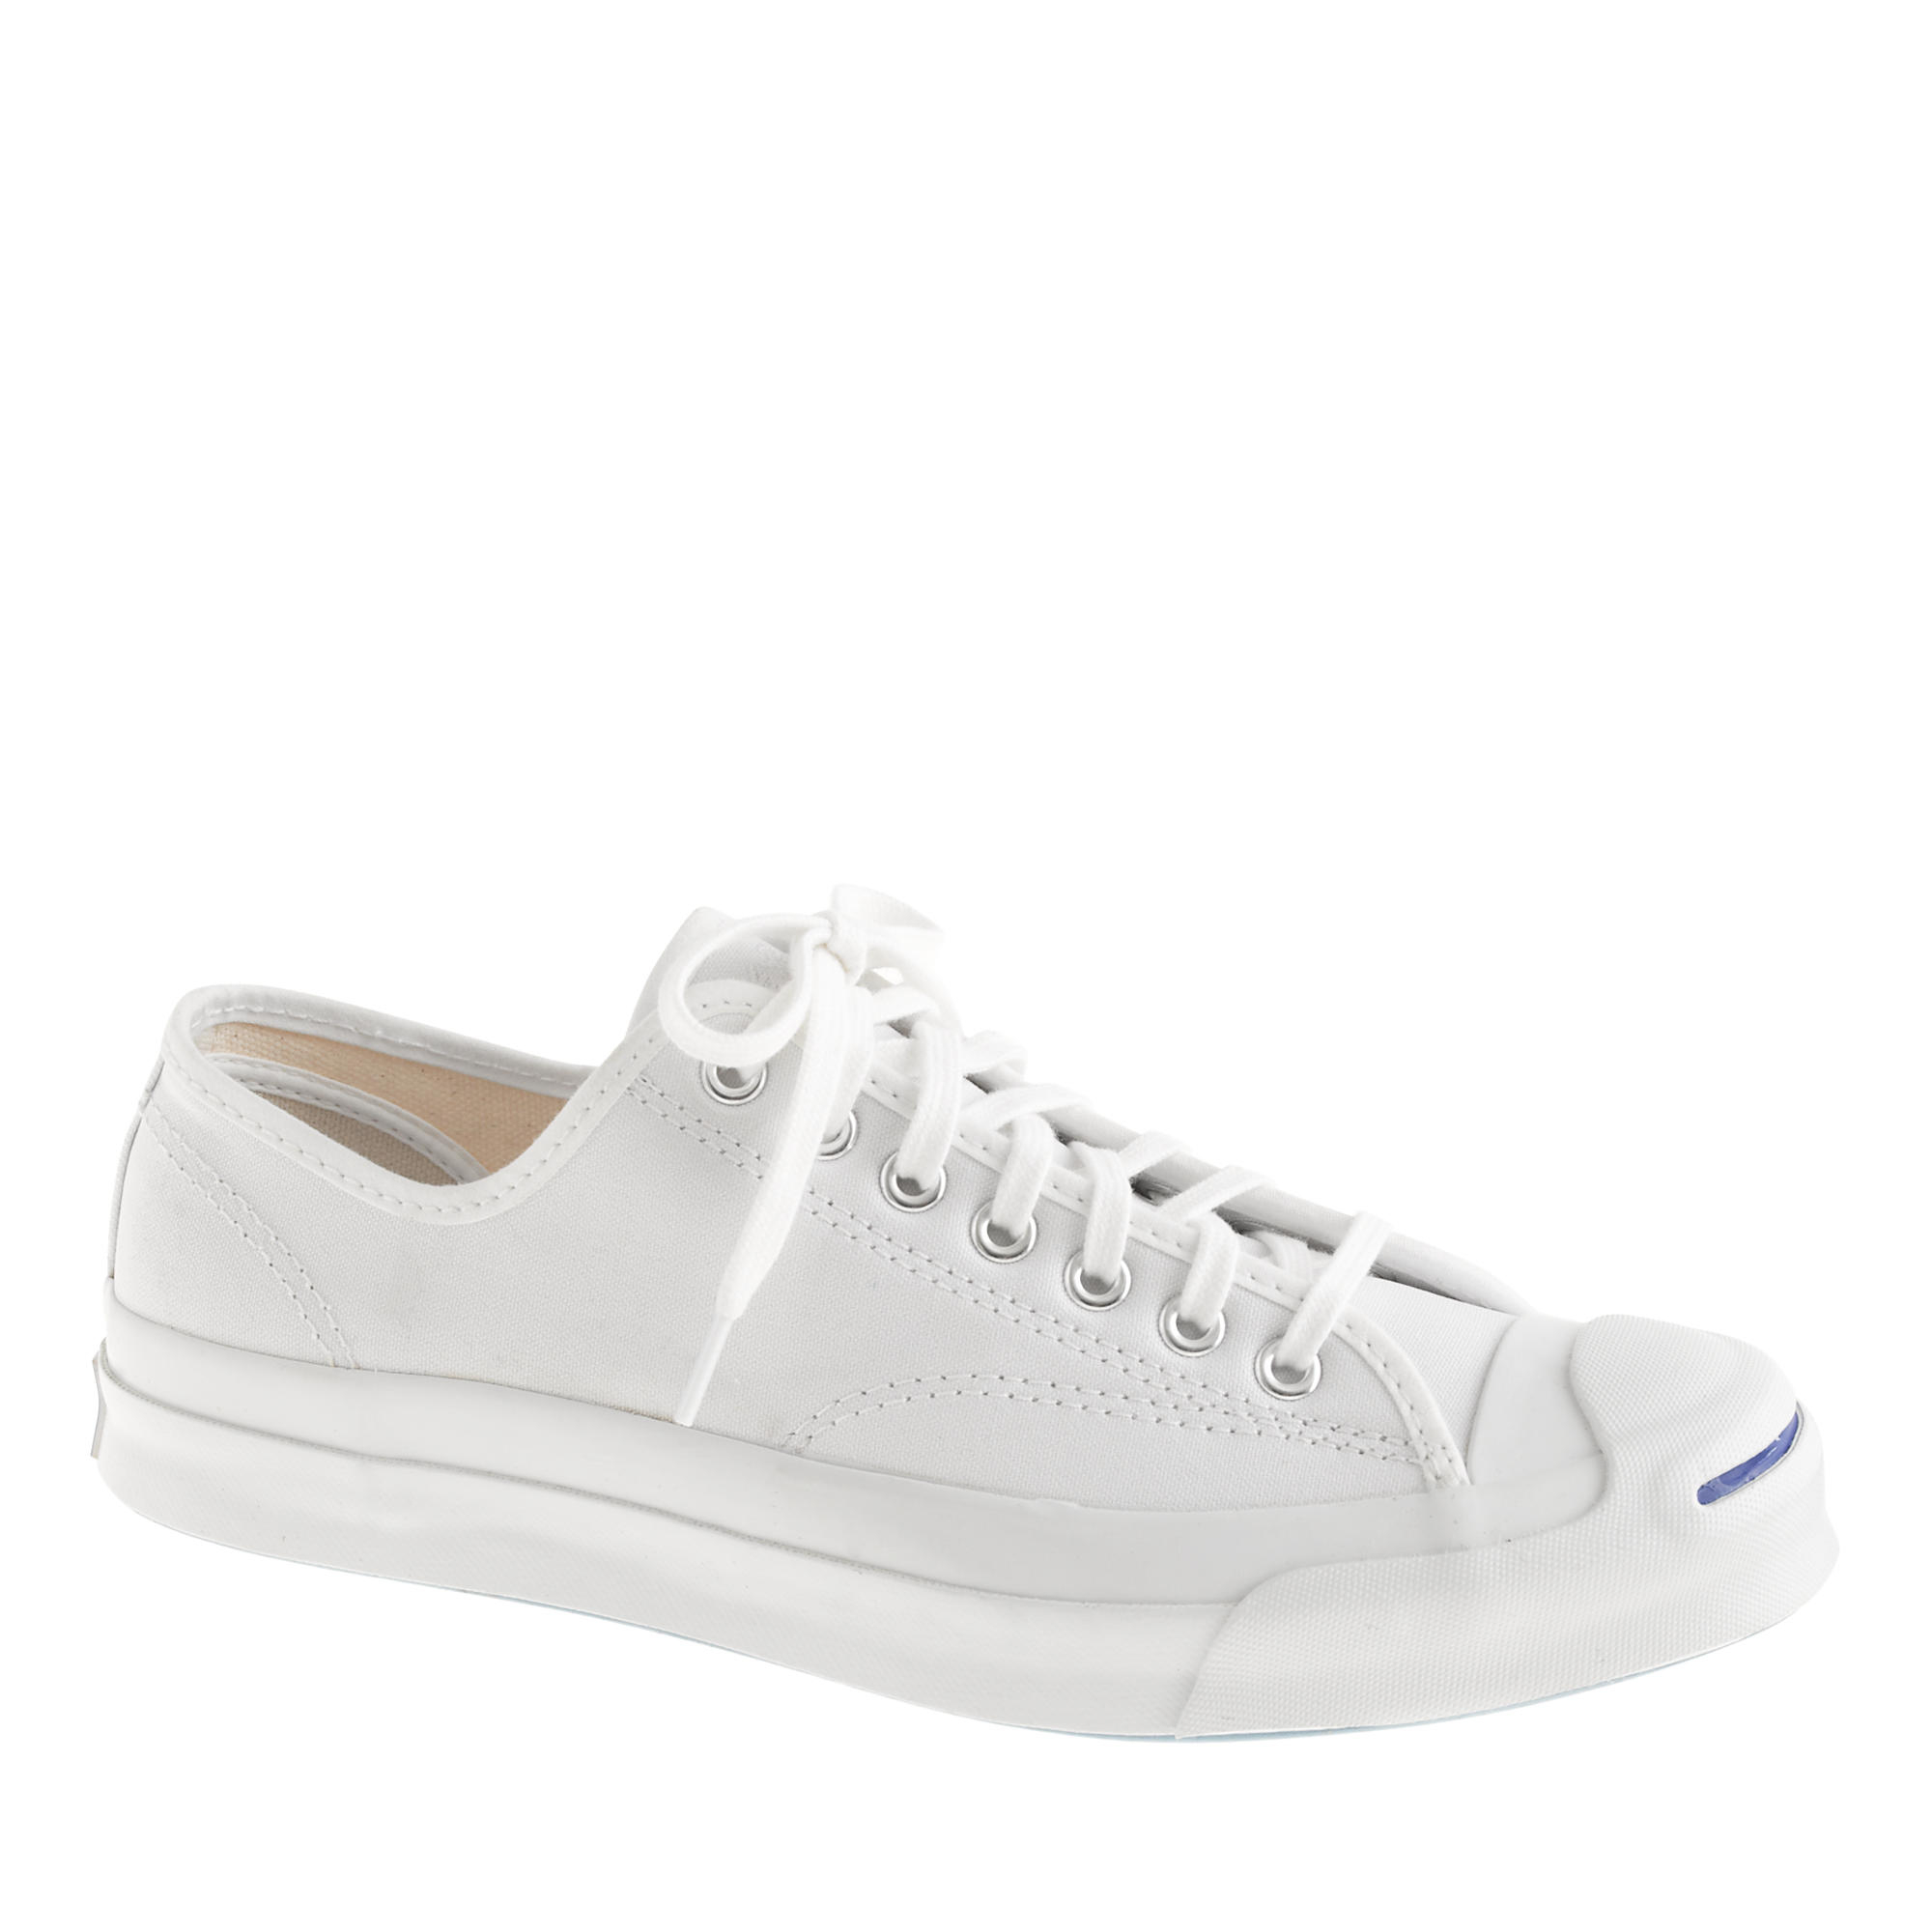 J.Crew Converse Jack Purcell Signature Sneakers in White for Men | Lyst